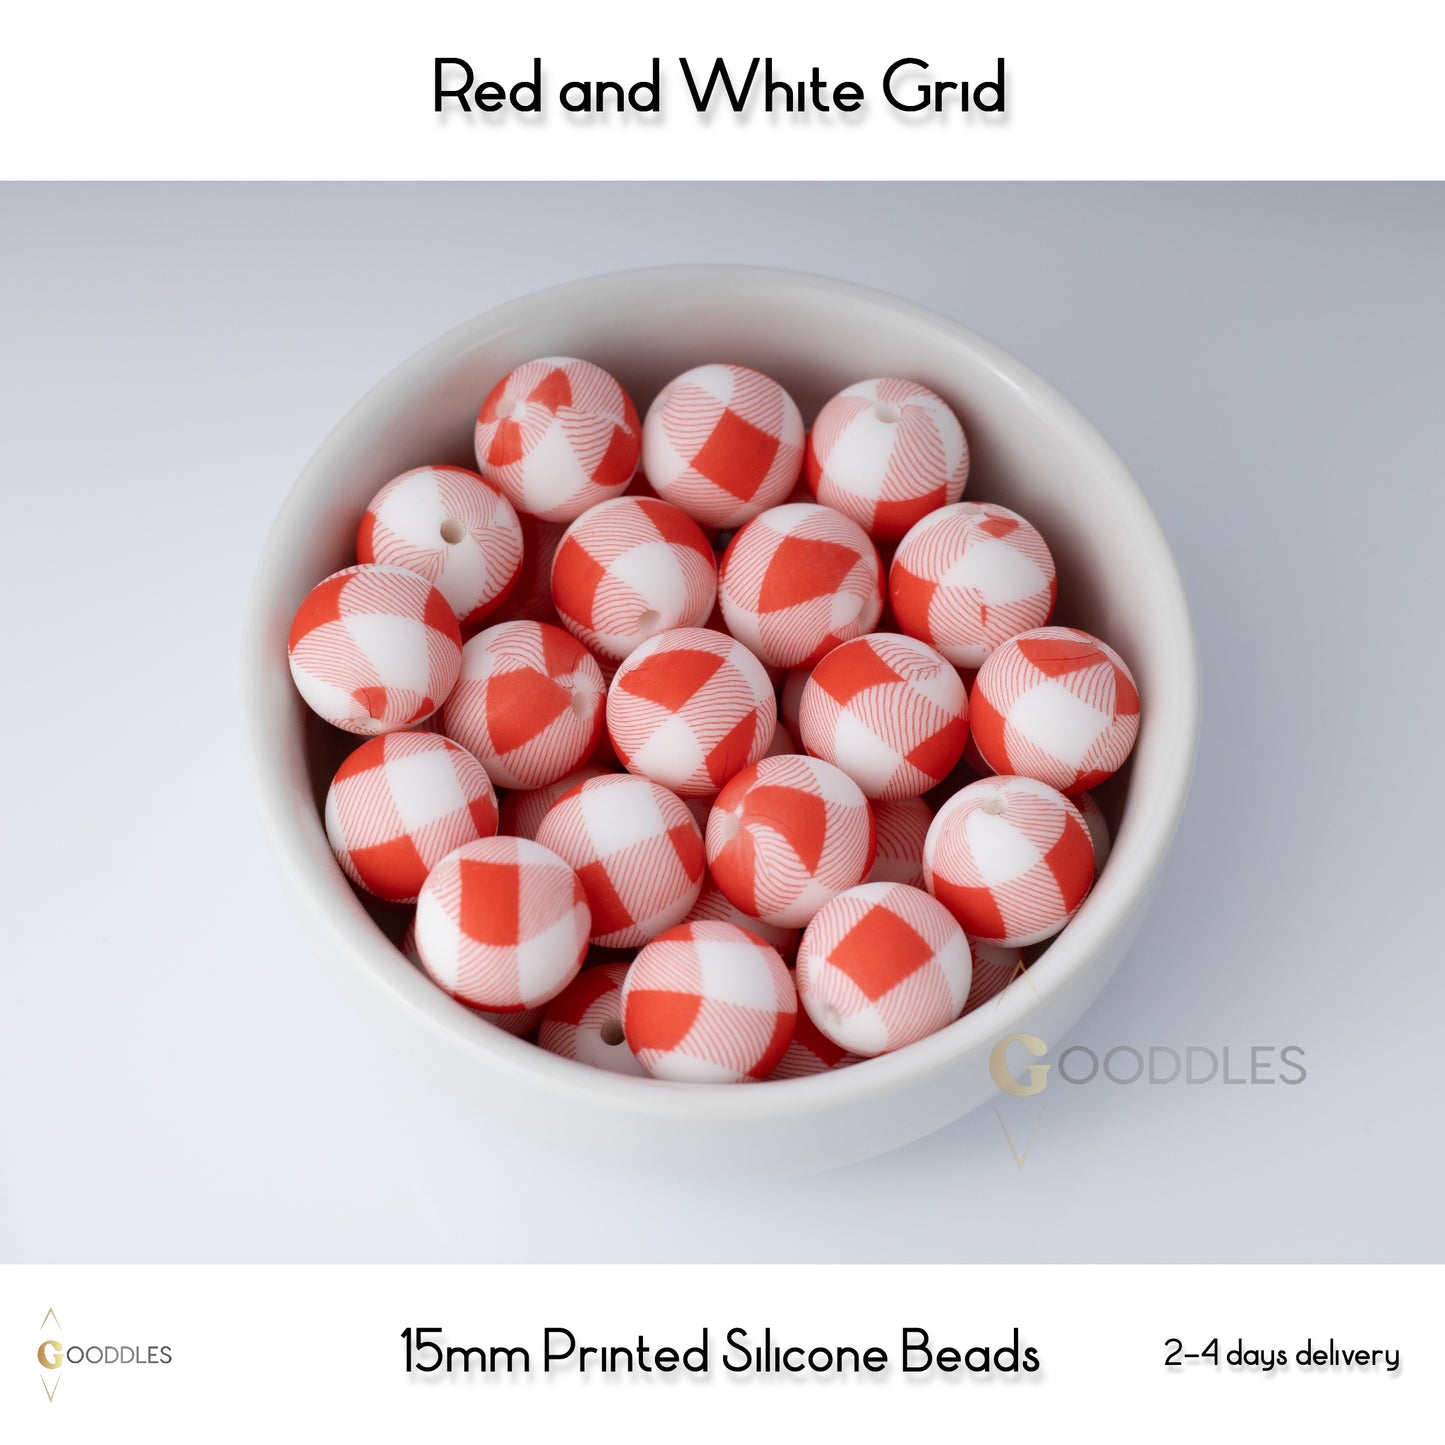 5pcs, Red and White Grid Silicone Beads Printed Round Silicone Beads